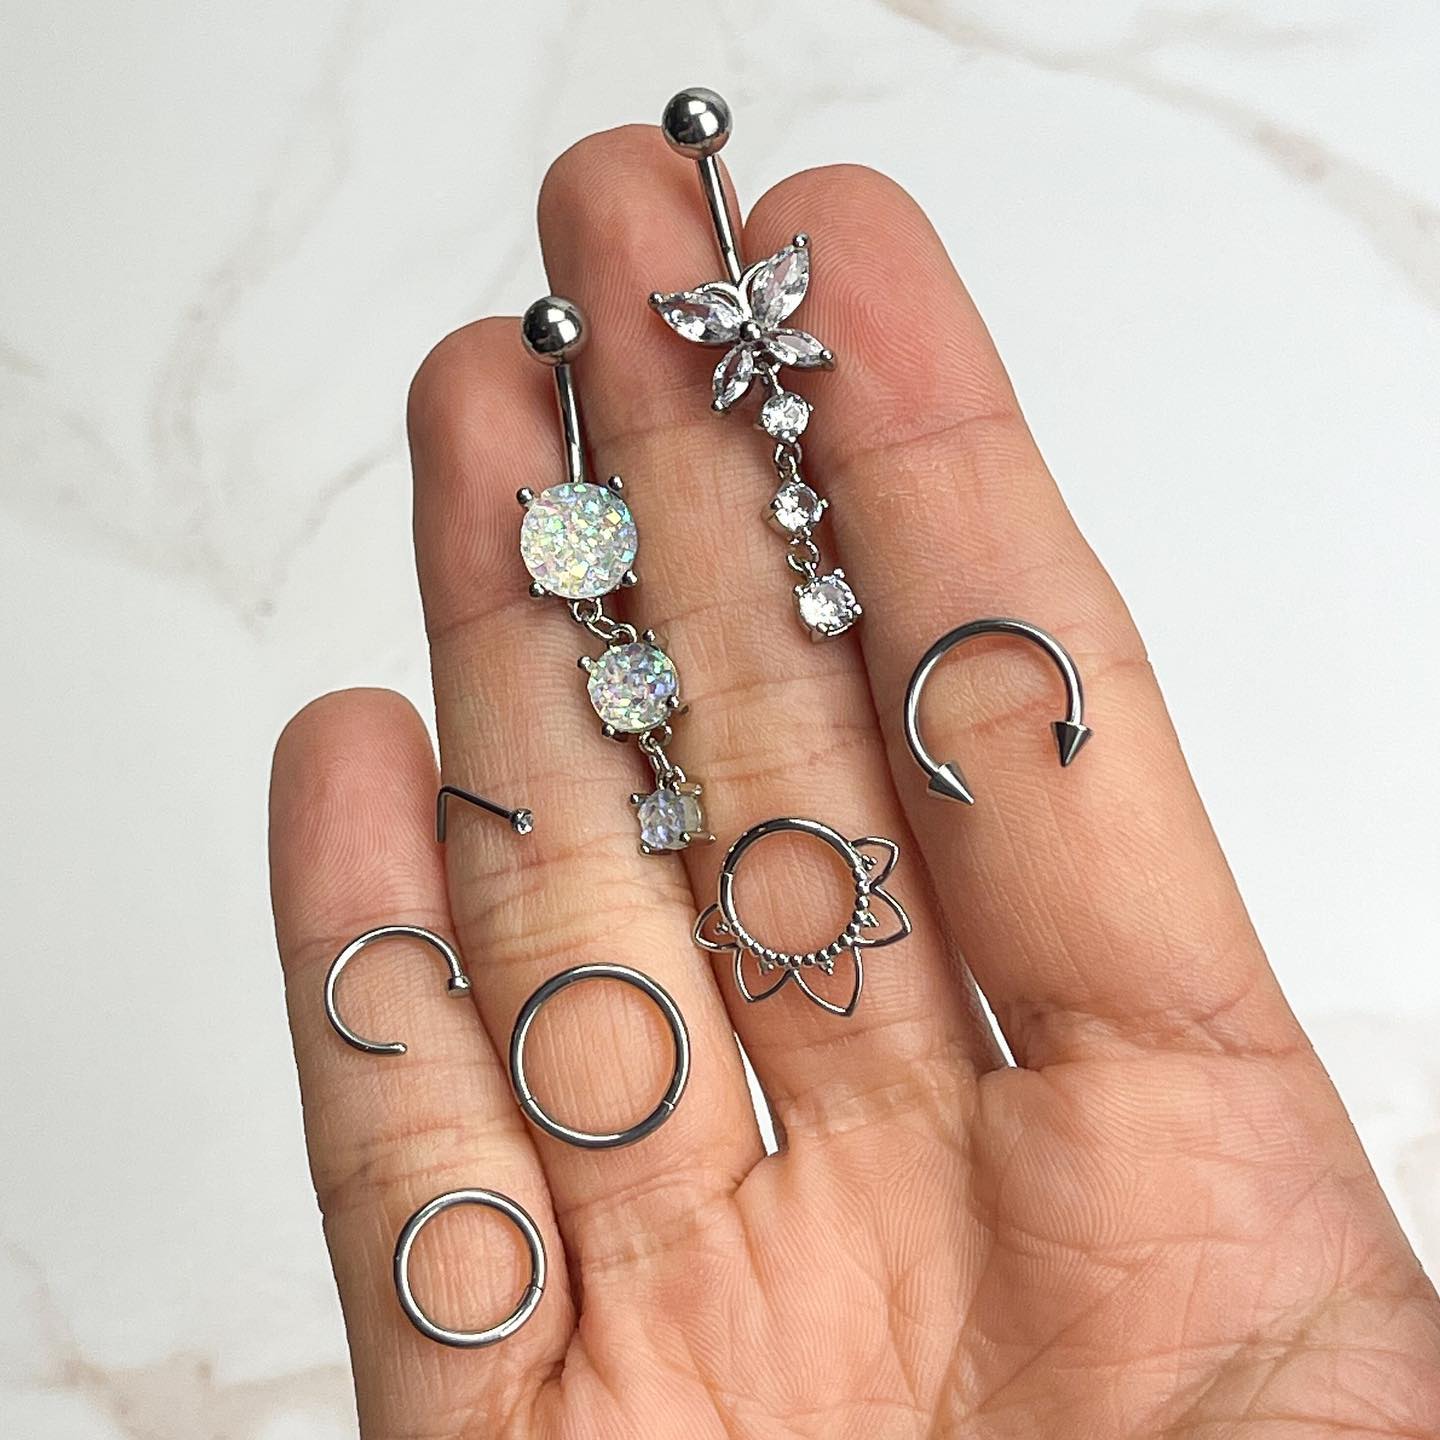 Nose Piercing Jewelry Styles